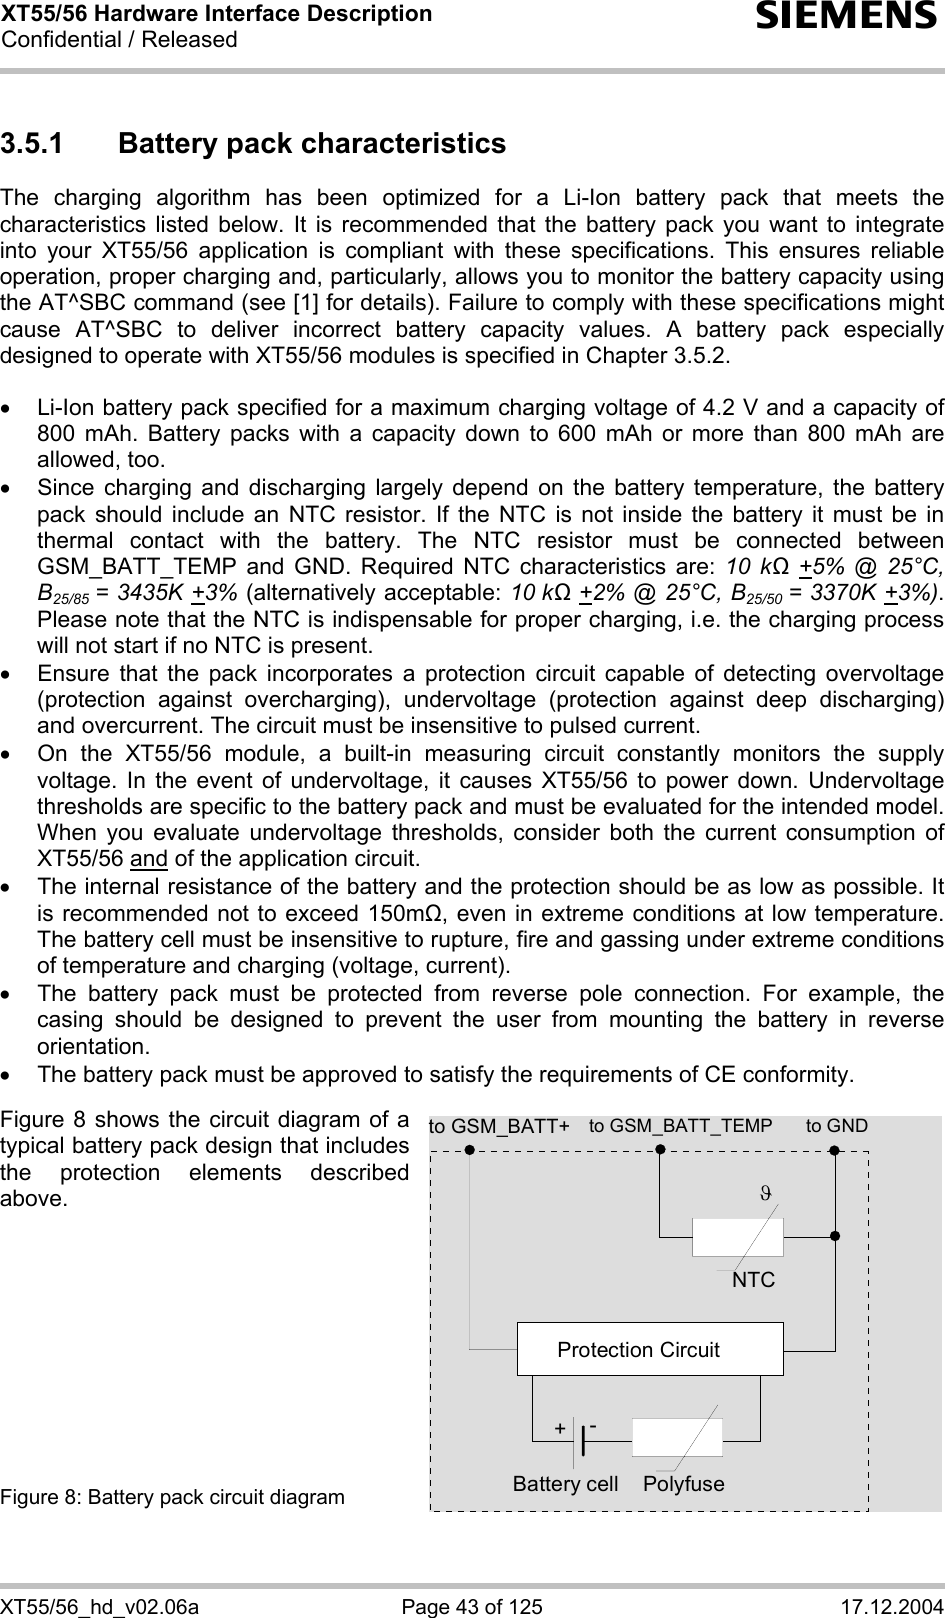 XT55/56 Hardware Interface Description Confidential / Released s XT55/56_hd_v02.06a  Page 43 of 125  17.12.2004 3.5.1  Battery pack characteristics The charging algorithm has been optimized for a Li-Ion battery pack that meets the characteristics listed below. It is recommended that the battery pack you want to integrate into your XT55/56 application is compliant with these specifications. This ensures reliable operation, proper charging and, particularly, allows you to monitor the battery capacity using the AT^SBC command (see [1] for details). Failure to comply with these specifications might cause AT^SBC to deliver incorrect battery capacity values. A battery pack especially designed to operate with XT55/56 modules is specified in Chapter 3.5.2.  •  Li-Ion battery pack specified for a maximum charging voltage of 4.2 V and a capacity of 800 mAh. Battery packs with a capacity down to 600 mAh or more than 800 mAh are allowed, too. •  Since charging and discharging largely depend on the battery temperature, the battery pack should include an NTC resistor. If the NTC is not inside the battery it must be in thermal contact with the battery. The NTC resistor must be connected between GSM_BATT_TEMP and GND. Required NTC characteristics are: 10 kΩ +5% @ 25°C, B25/85  = 3435K +3% (alternatively acceptable: 10 kΩ +2% @ 25°C, B25/50  = 3370K +3%). Please note that the NTC is indispensable for proper charging, i.e. the charging process will not start if no NTC is present. •  Ensure that the pack incorporates a protection circuit capable of detecting overvoltage (protection against overcharging), undervoltage (protection against deep discharging) and overcurrent. The circuit must be insensitive to pulsed current. •  On the XT55/56 module, a built-in measuring circuit constantly monitors the supply voltage. In the event of undervoltage, it causes XT55/56 to power down. Undervoltage thresholds are specific to the battery pack and must be evaluated for the intended model. When you evaluate undervoltage thresholds, consider both the current consumption of XT55/56 and of the application circuit.  •  The internal resistance of the battery and the protection should be as low as possible. It is recommended not to exceed 150m, even in extreme conditions at low temperature. The battery cell must be insensitive to rupture, fire and gassing under extreme conditions of temperature and charging (voltage, current). •  The battery pack must be protected from reverse pole connection. For example, the casing should be designed to prevent the user from mounting the battery in reverse orientation. •  The battery pack must be approved to satisfy the requirements of CE conformity.  Figure 8 shows the circuit diagram of a typical battery pack design that includes the protection elements described above.           Figure 8: Battery pack circuit diagram  to GSM_BATT_TEMP to GNDNTCPolyfuseϑProtection Circuit+-Battery cellto GSM_BATT+